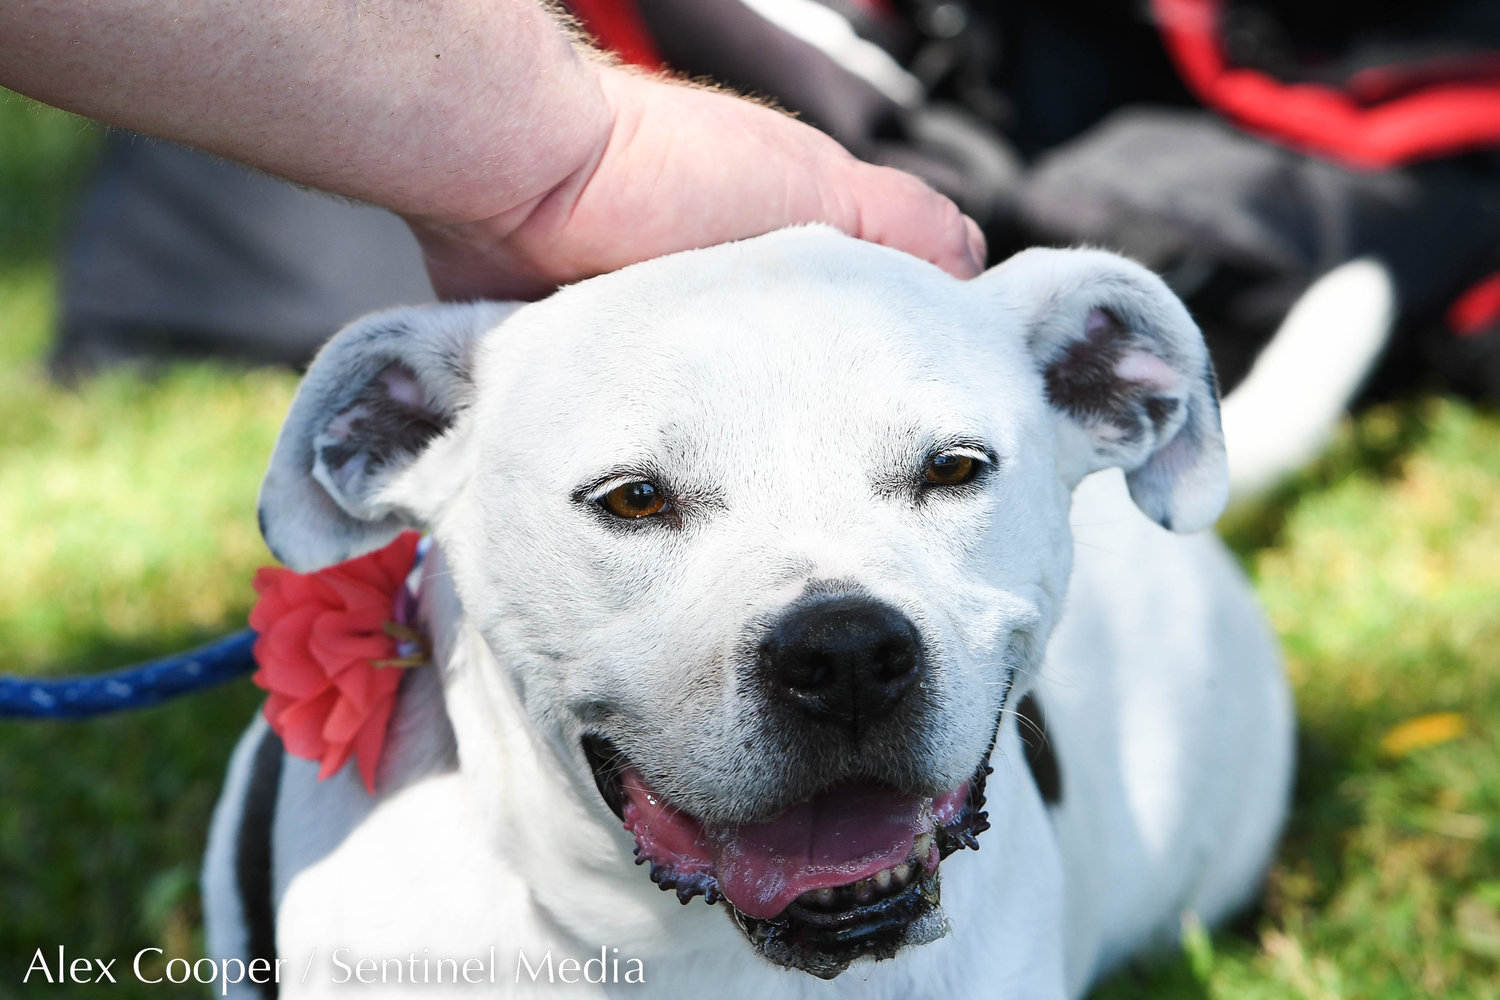 Katie, a pitbull mix, gets a pet on the head during a dog show hosted by the Herkimer County Humane Society on Saturday at Central Plaza in Ilion. The show was part of a long list of events hosted during Ilion Days 2022 from July 16-24.